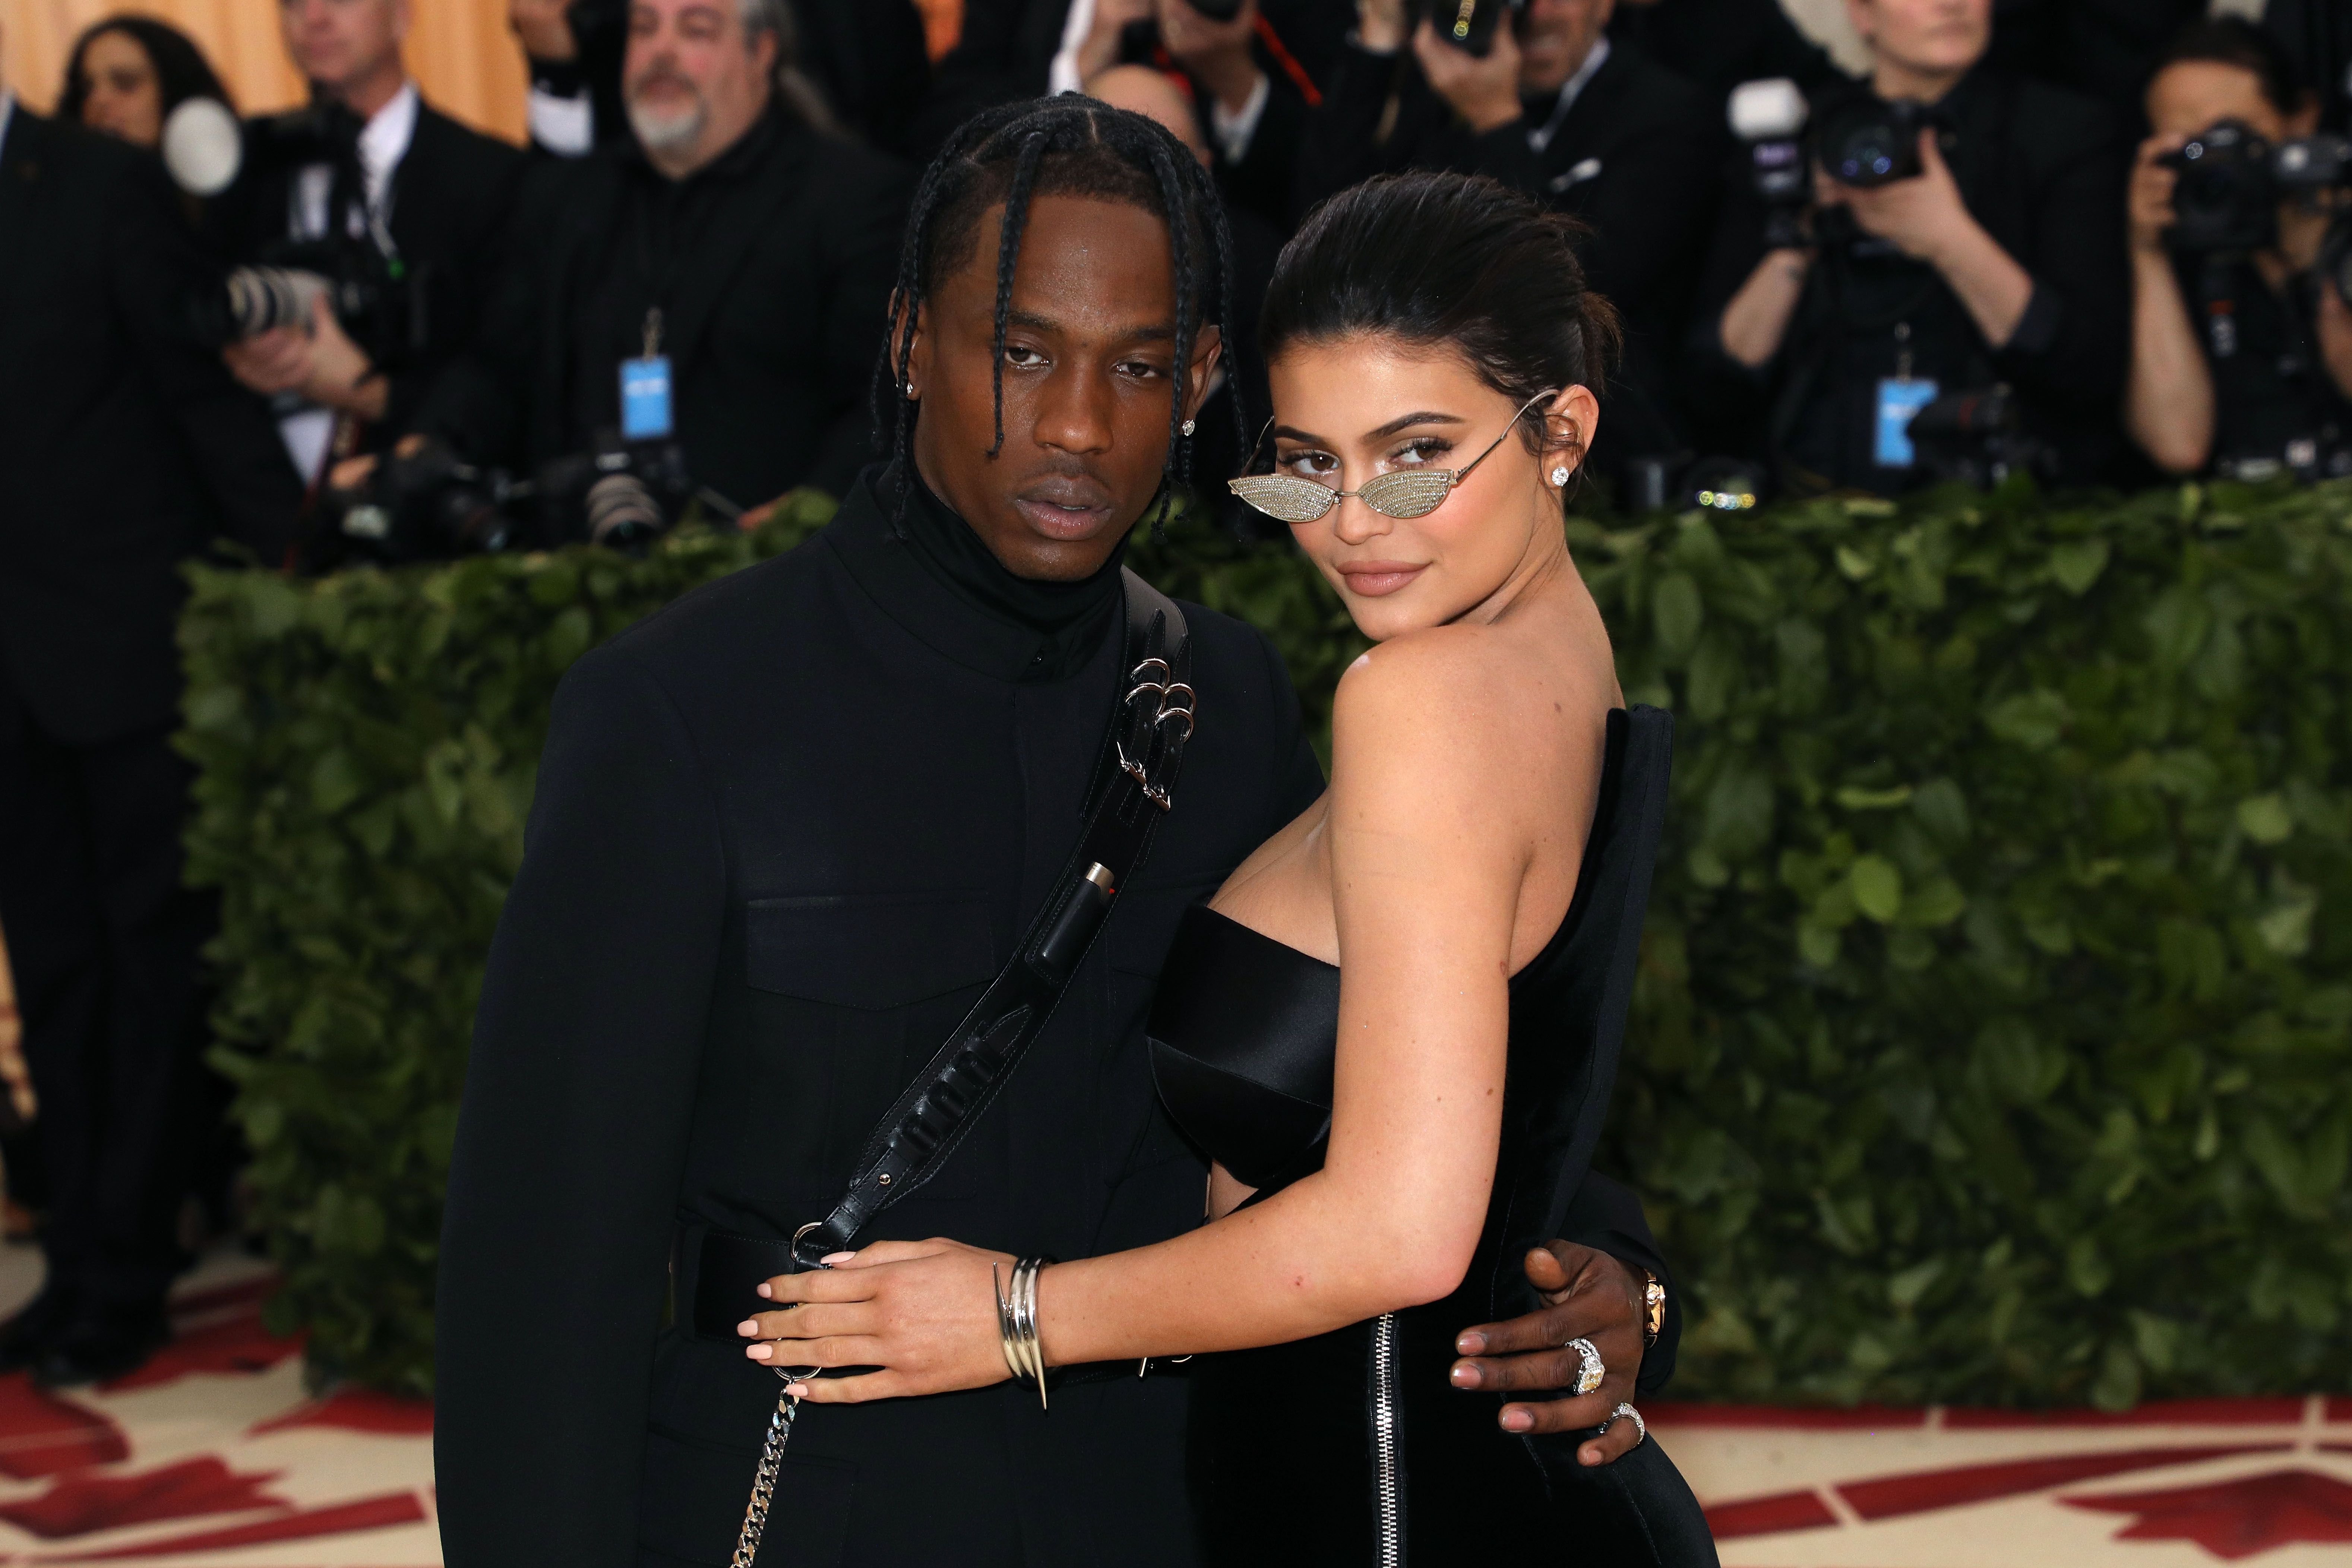 Kylie Jenner and Travis Scott's first joint photo shoot